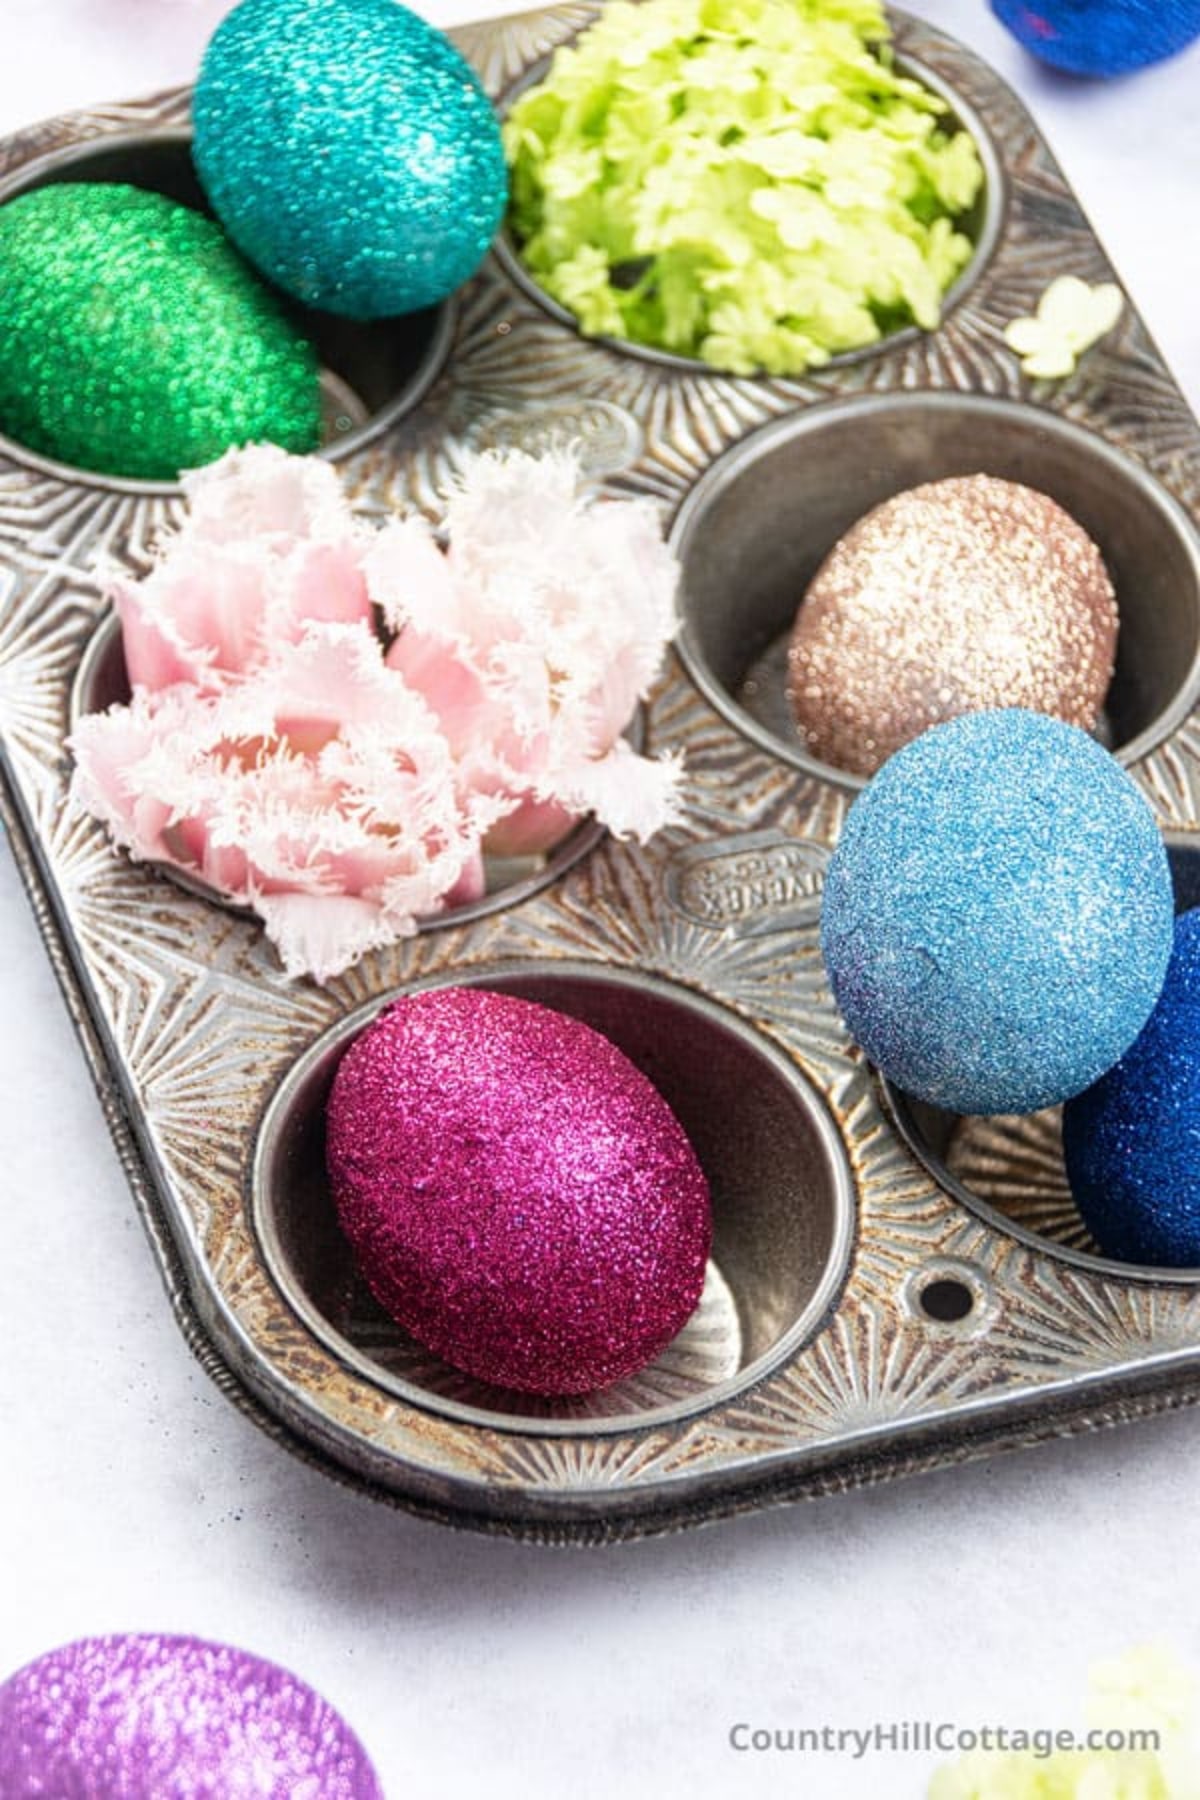 Green, blue and pink glitter Easter eggs